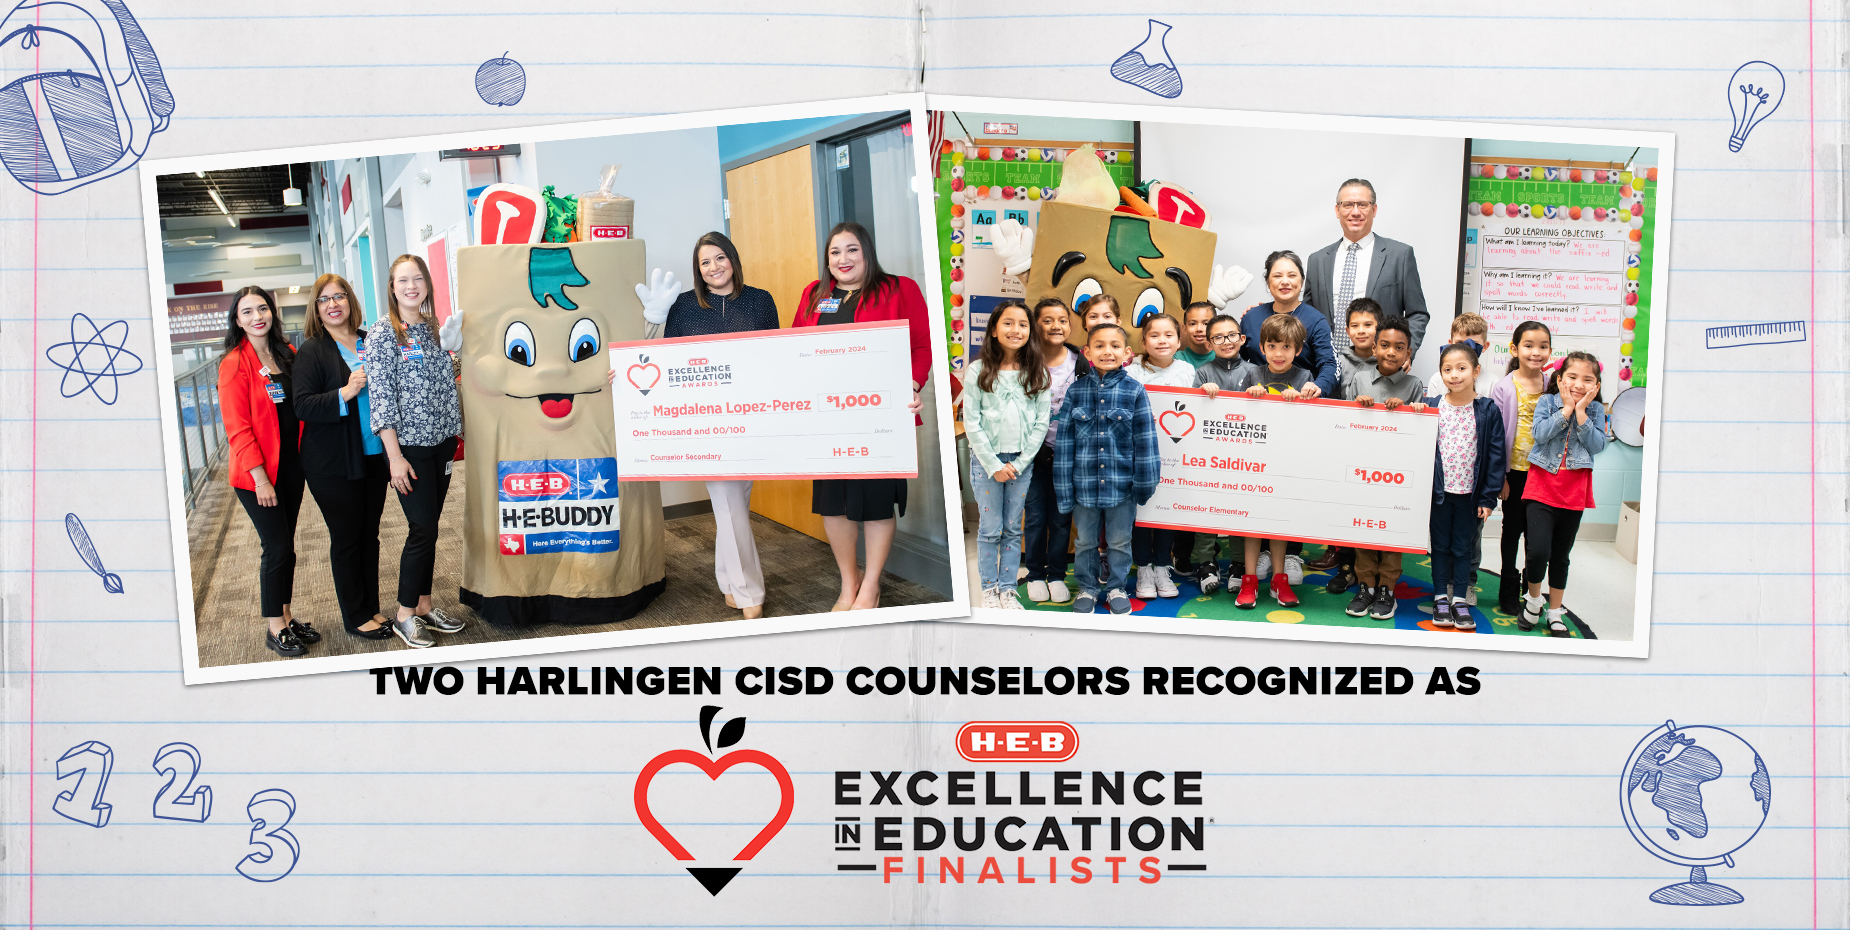 Two Harlingen CISD counselors recognized as H-E-B Excellence in Education Finalists